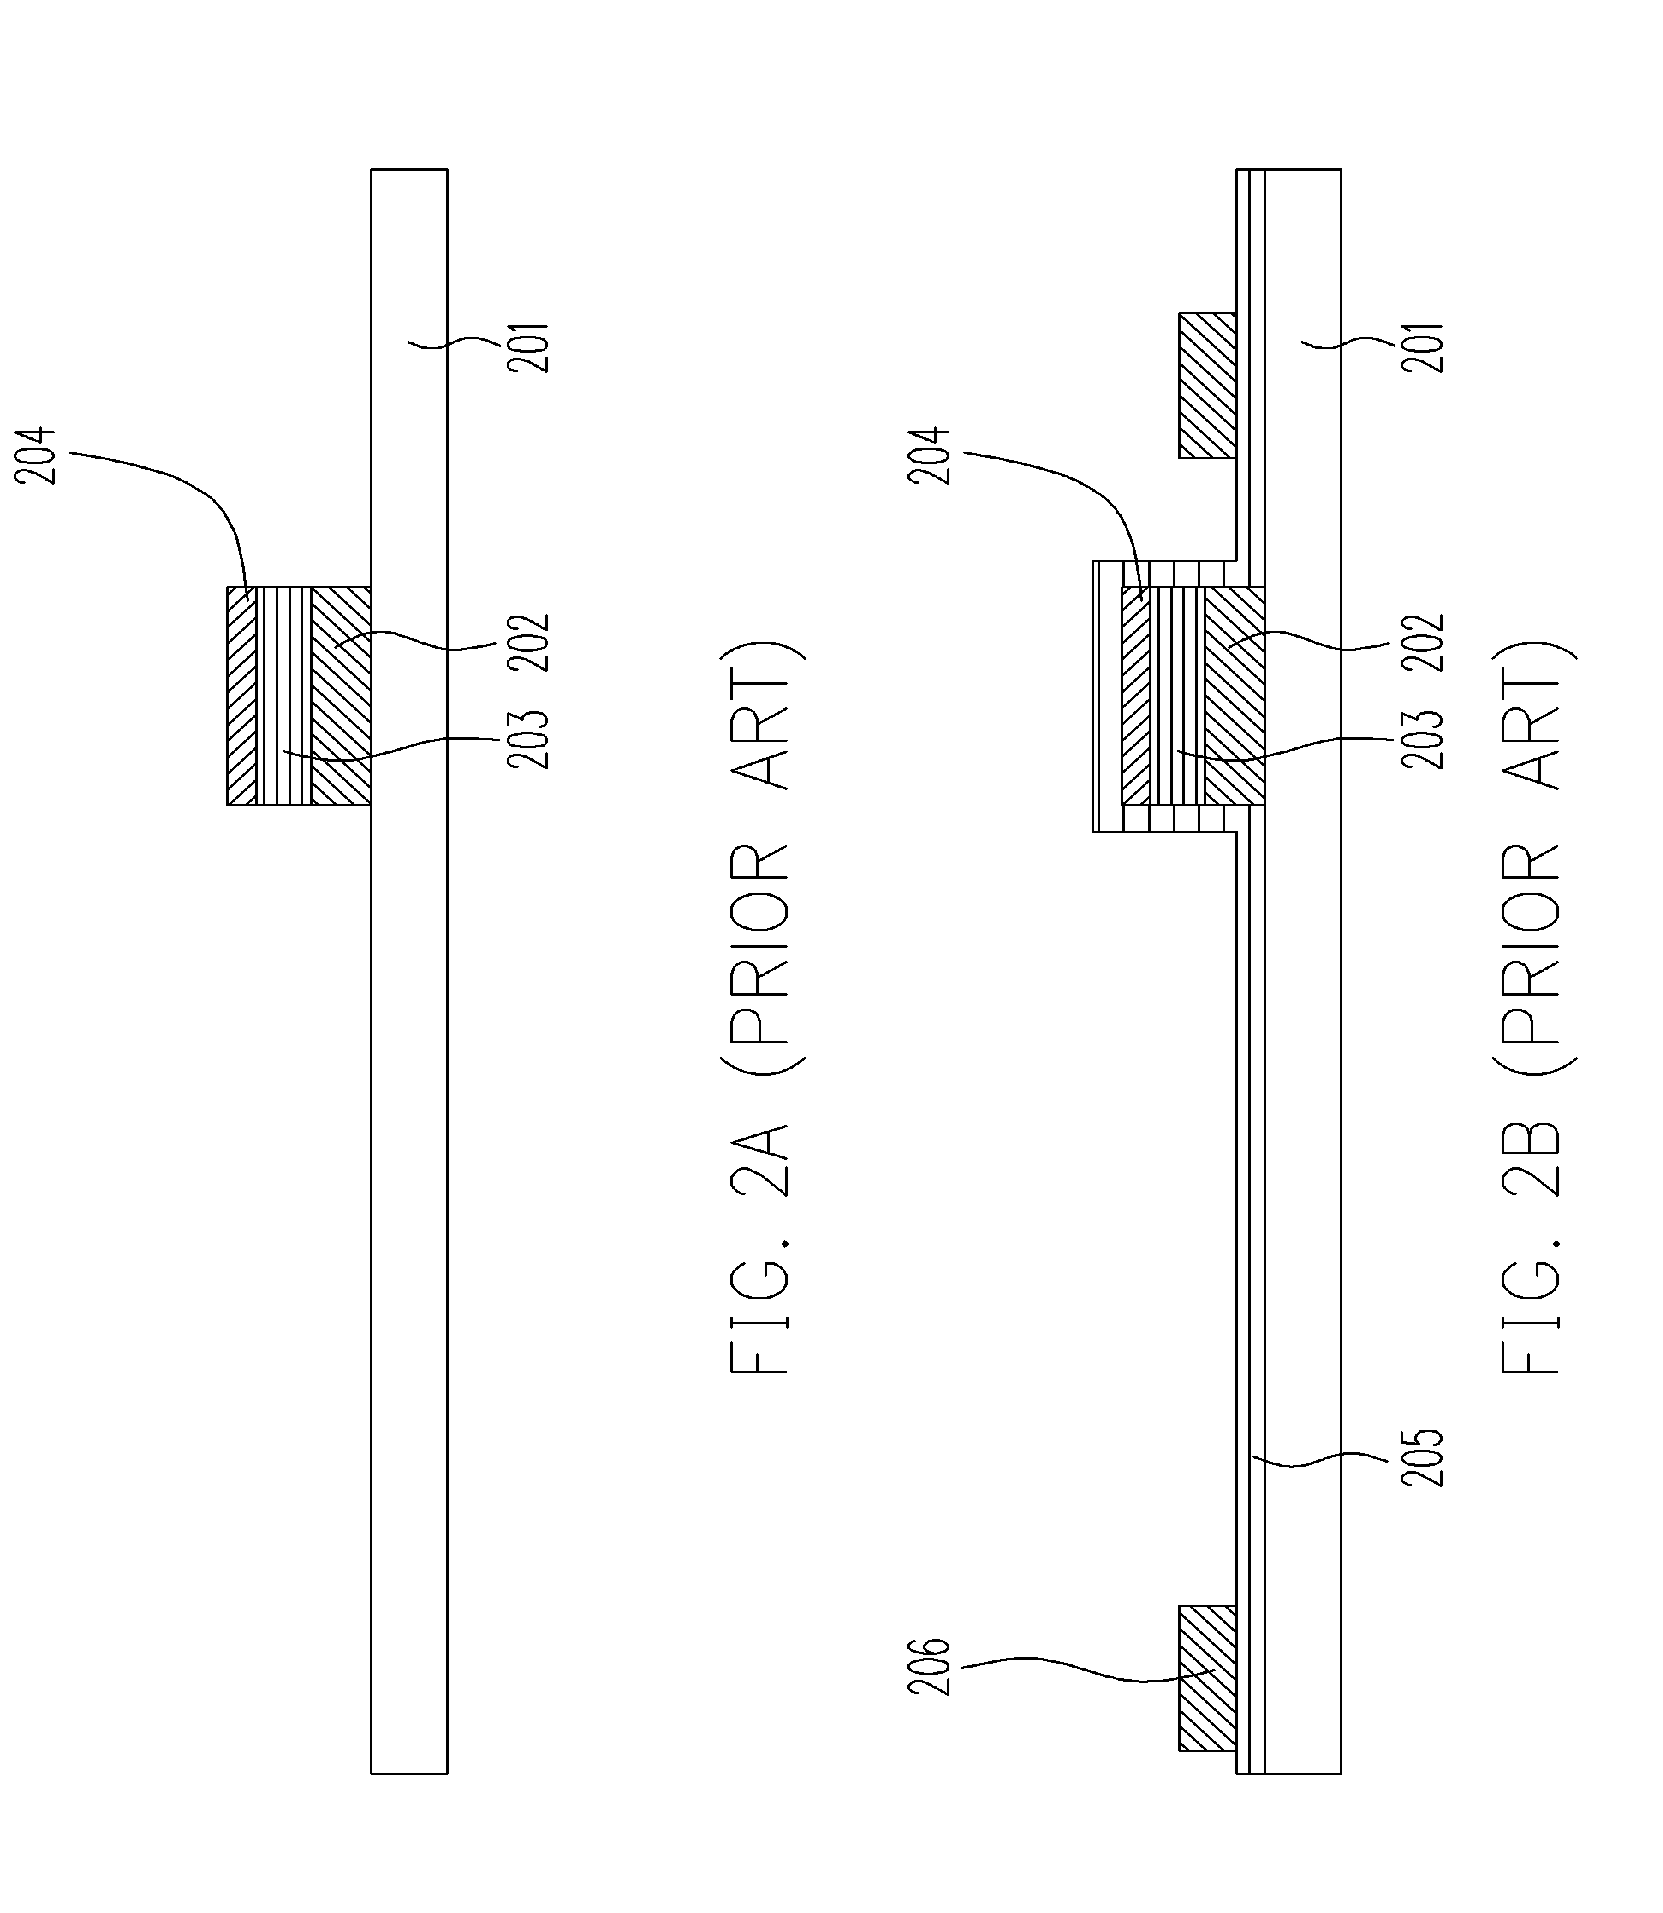 Structure of thin film transistor array and method for fabricating the same